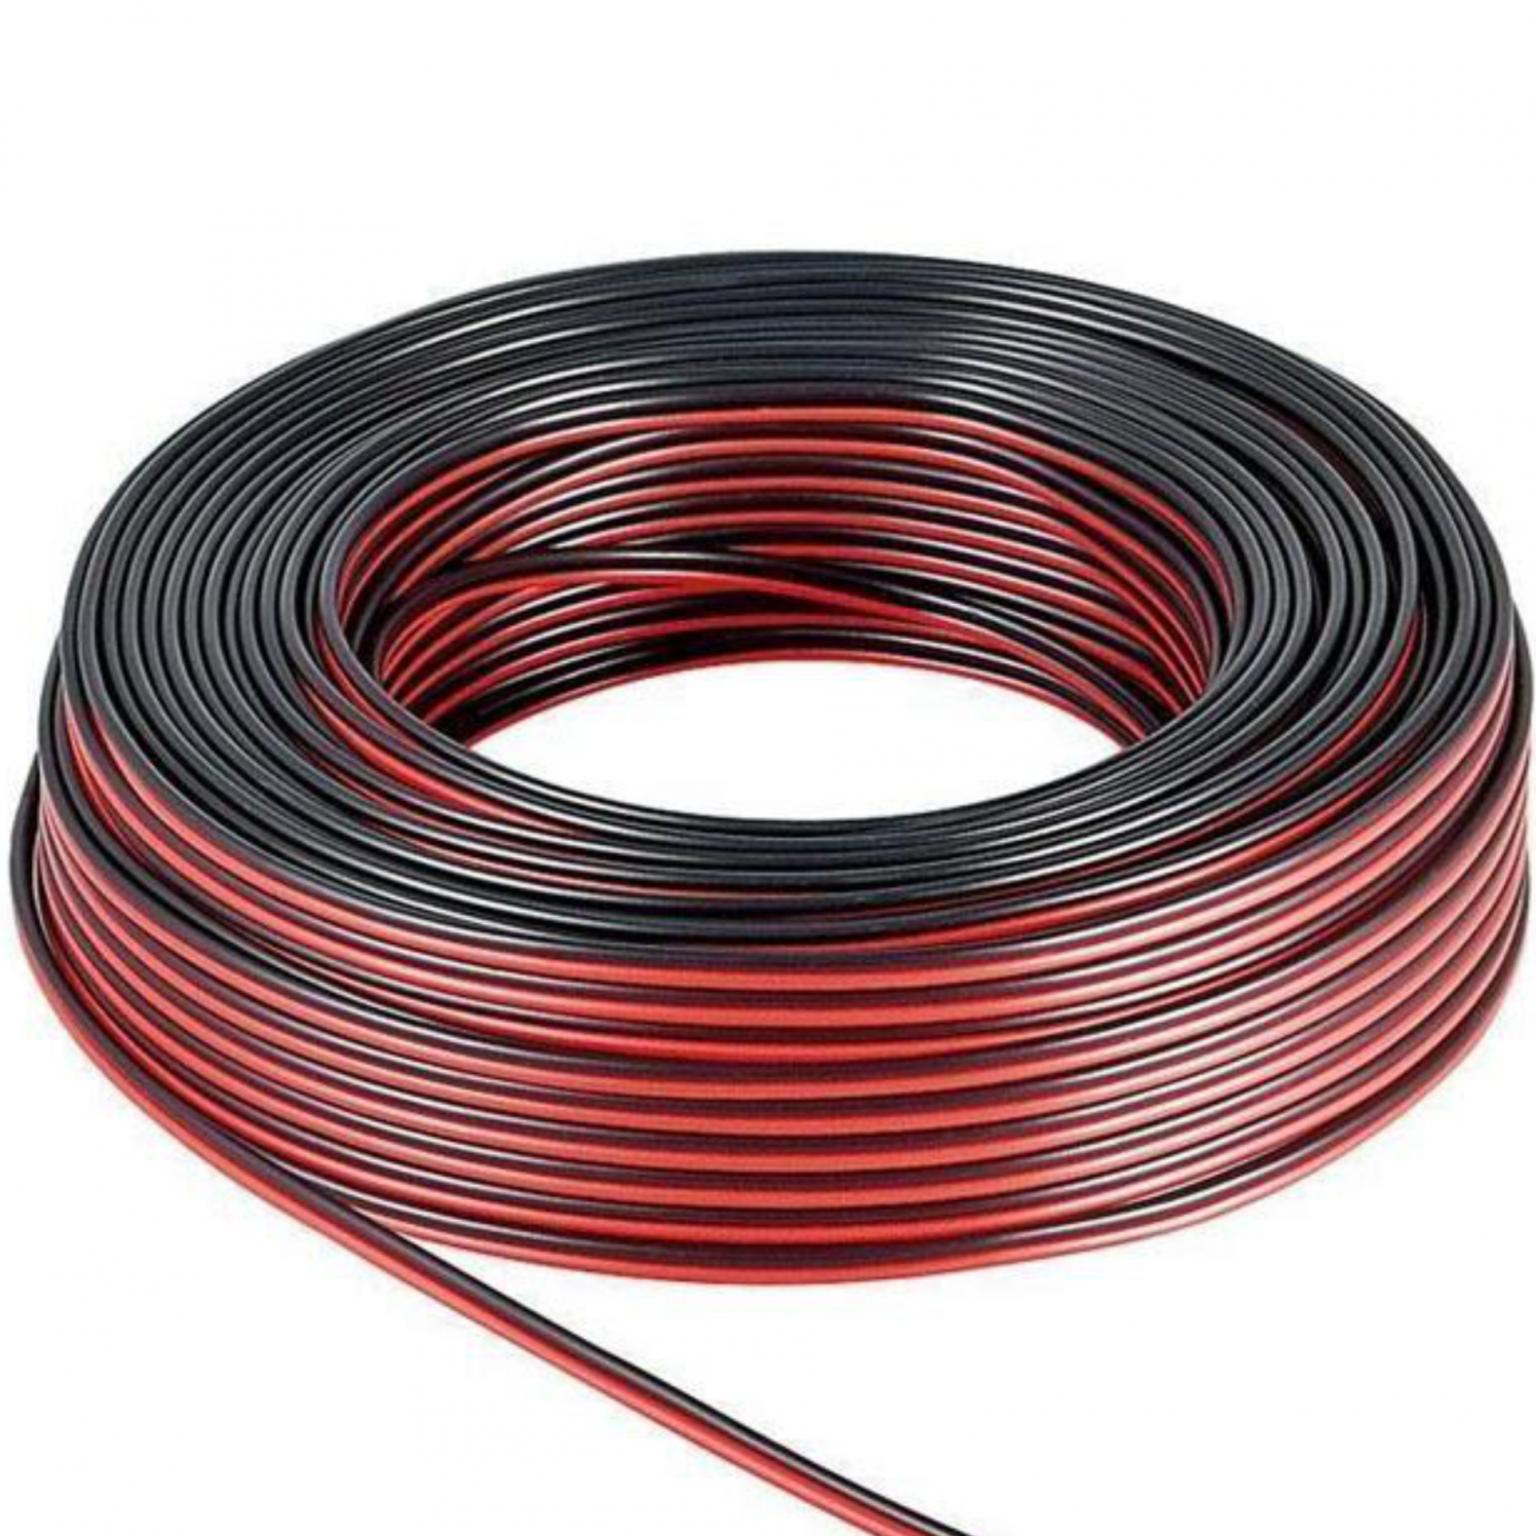 Image of Loudspeaker cable red/black CCA 50 m roll, cable diameter 2 x 1,5 mm?